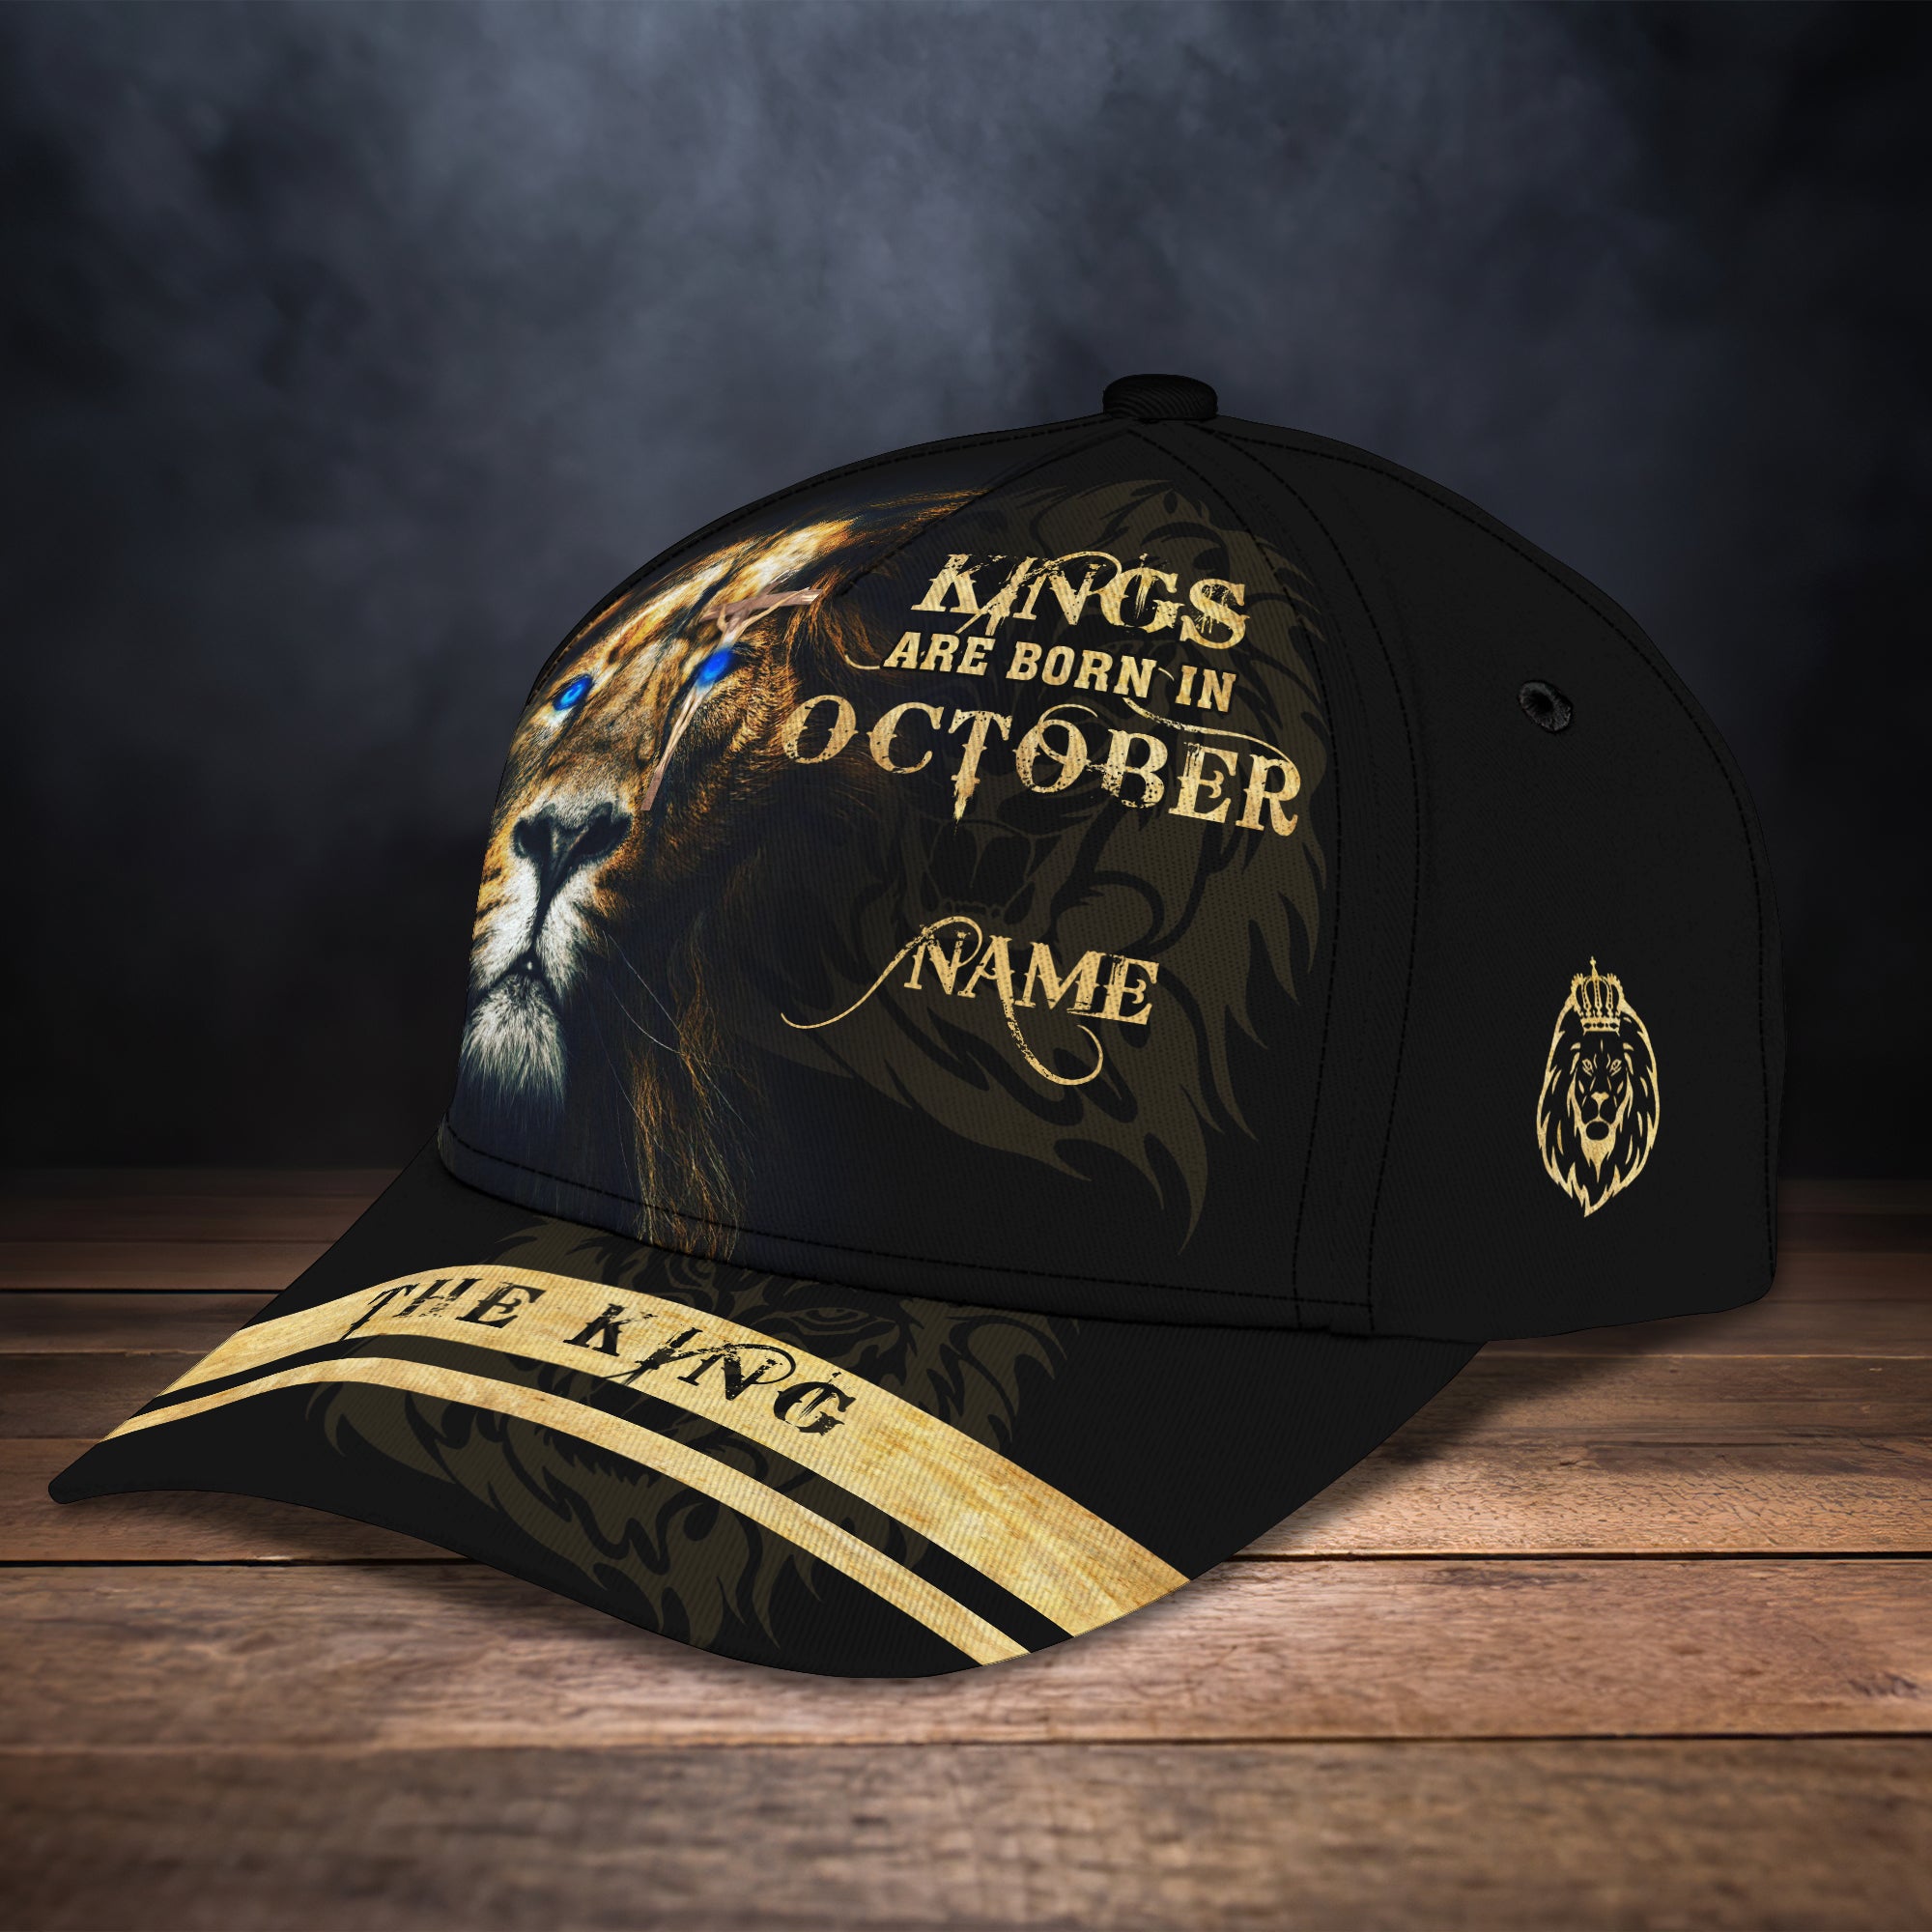 Kings Are Born In october - Personalized Name Cap 10 - LST149